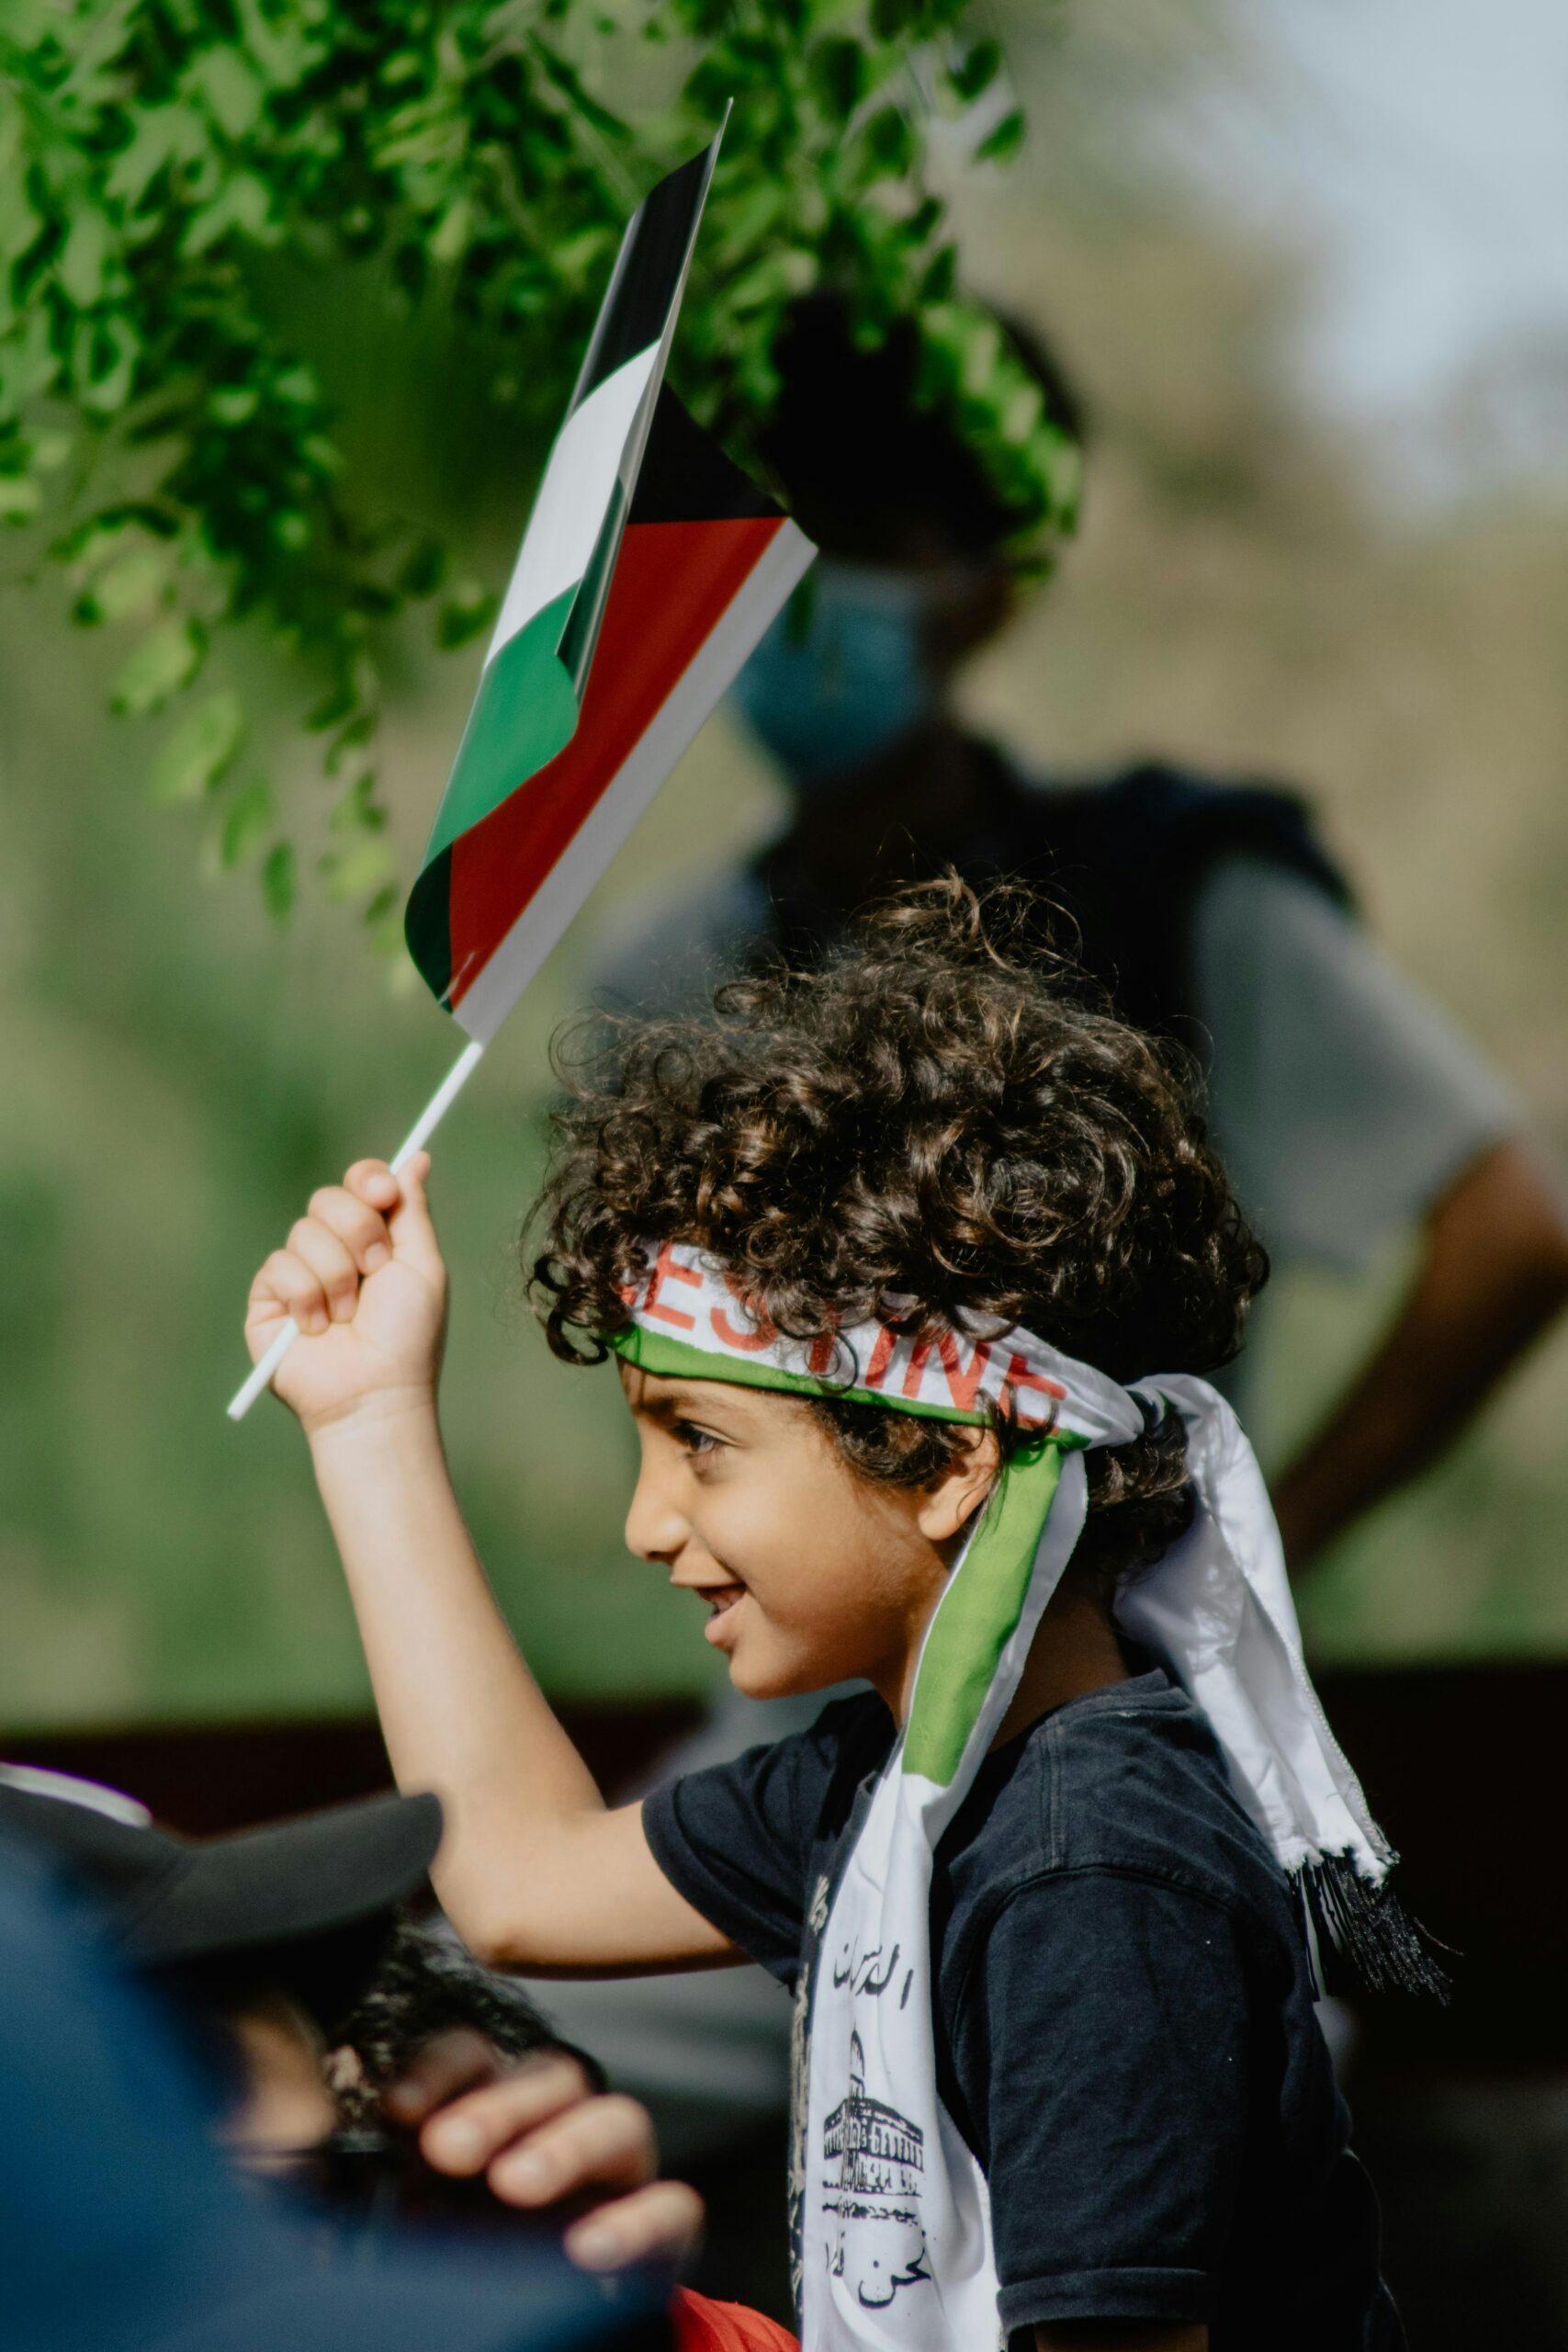 Boy in blue and white shirt holding a Palestinian flag